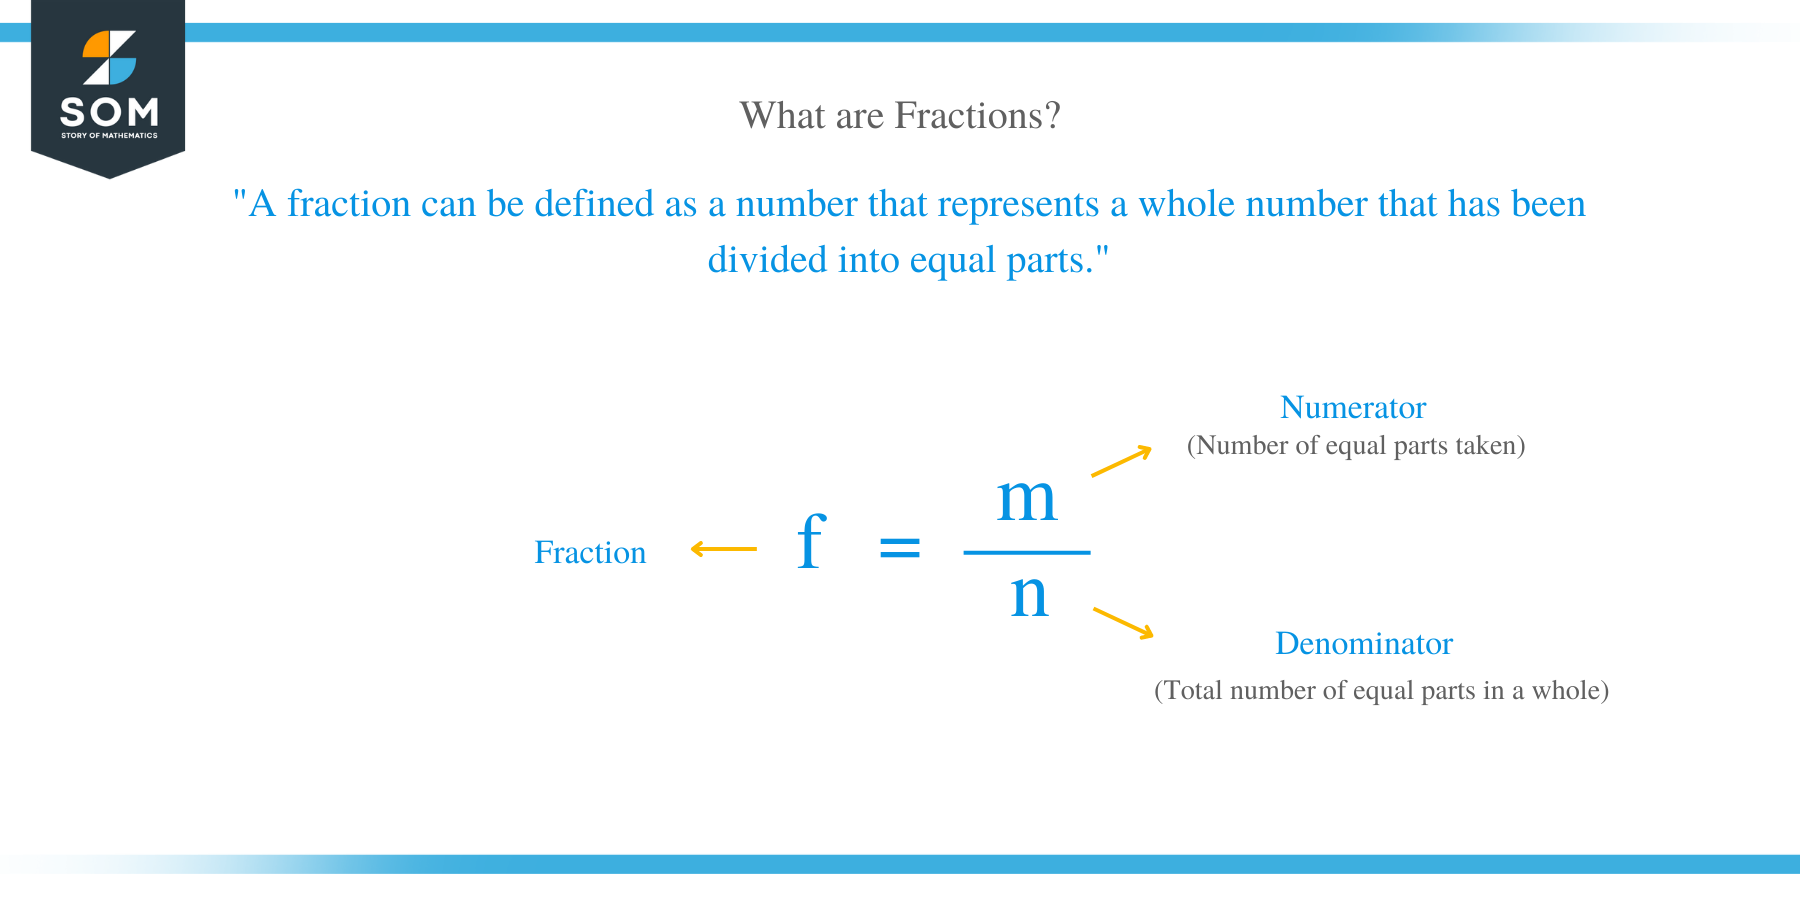 What are Fractions?